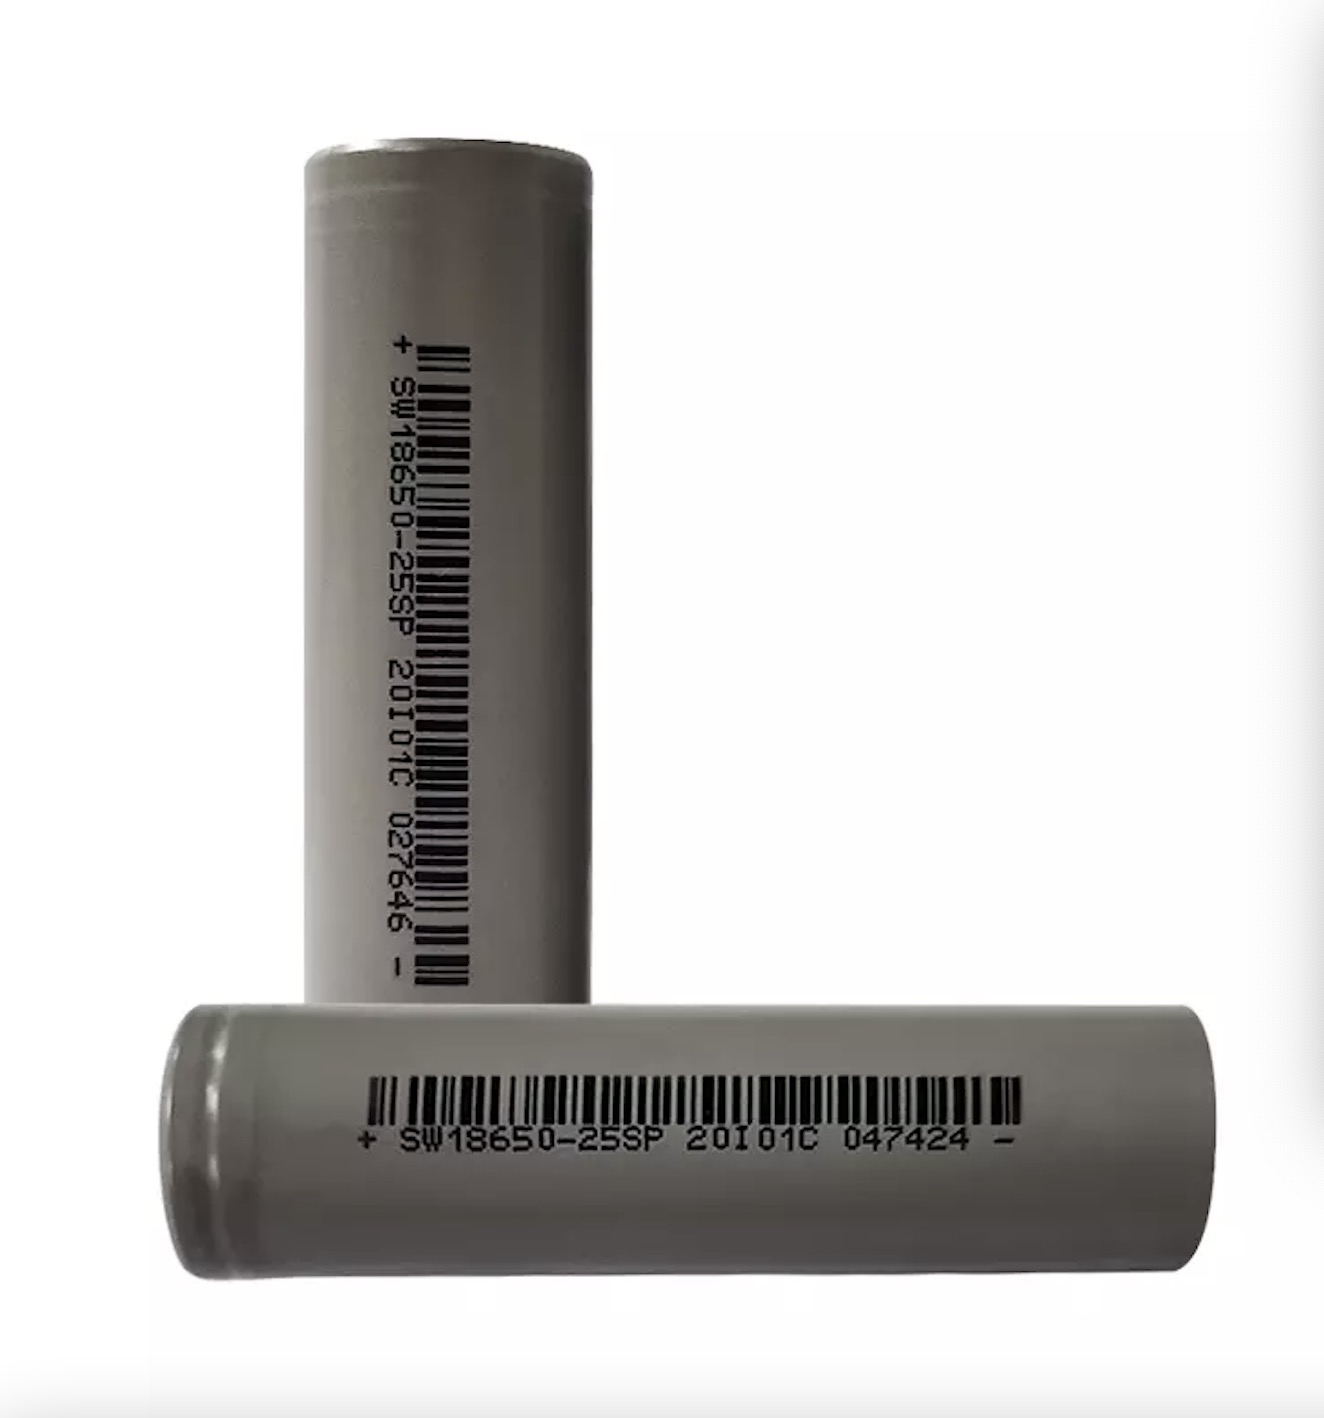 Highdrive SW18650-25SP 12C High discharge rate 18650 3.7V 2500mah lithium battery cell for UAV